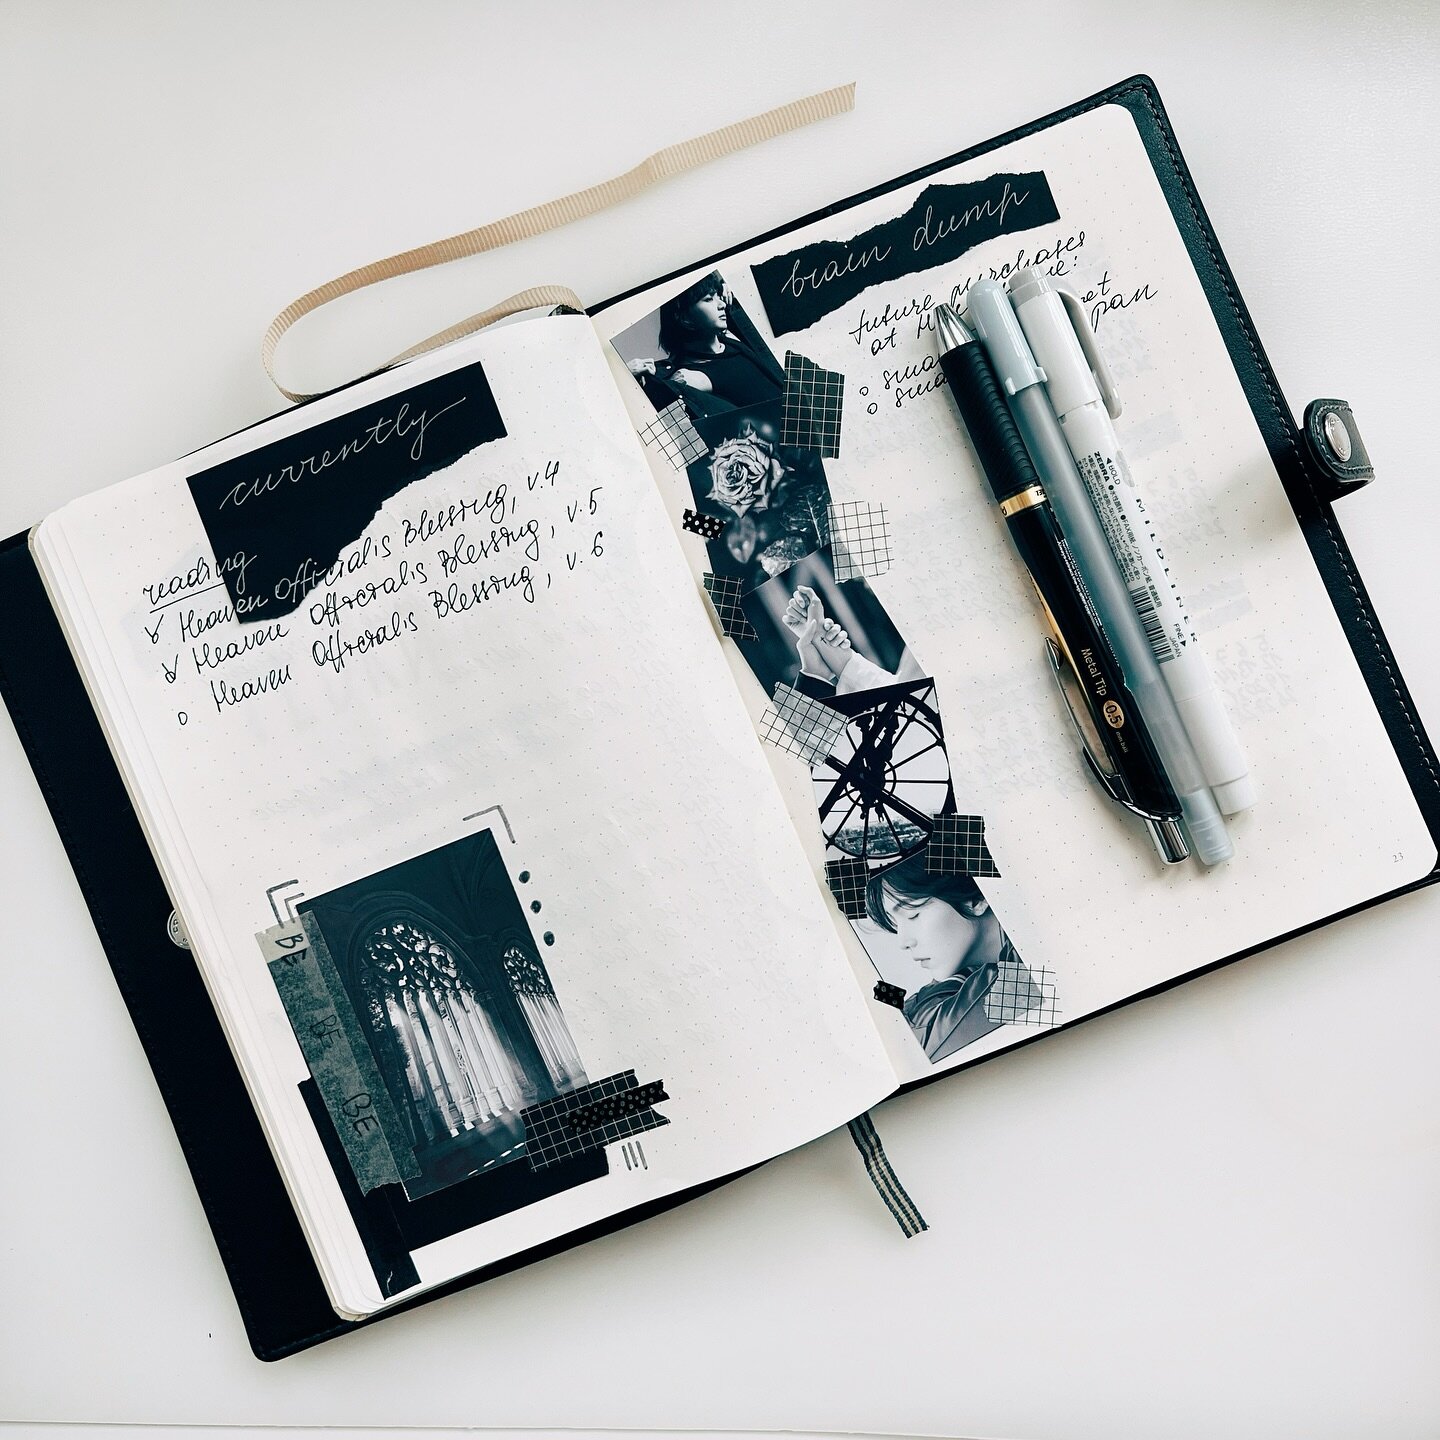 Welcome to my February 🖤 If you recognize the references in the images, drop me a comment 🤭

#bujo #bujospread #bujoaddict #bujobeauty #leuchtturm1917 #blackvalentine #blackandwhite